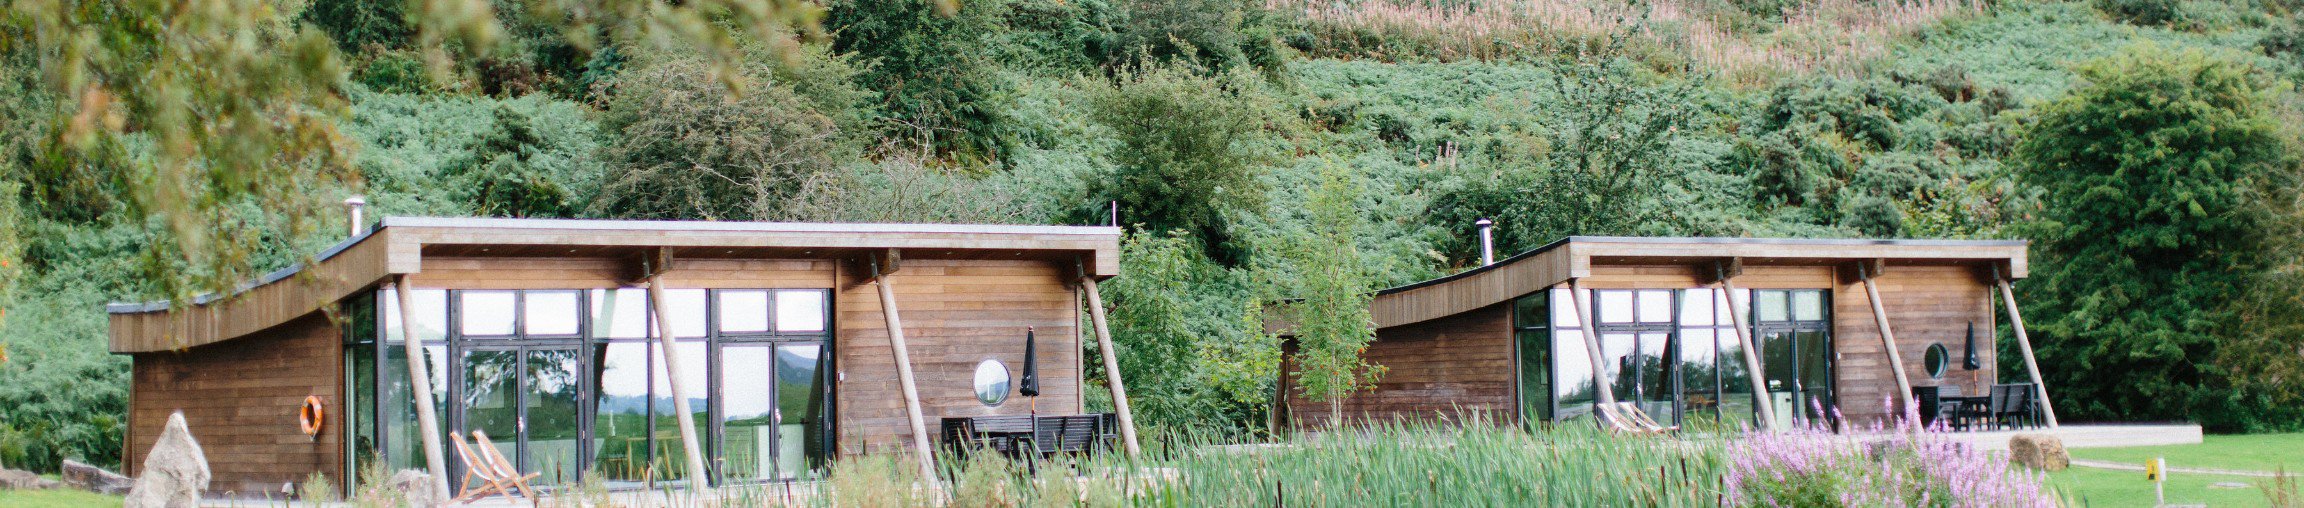 Luxury Log Cabins In Yorkshire Together Travel